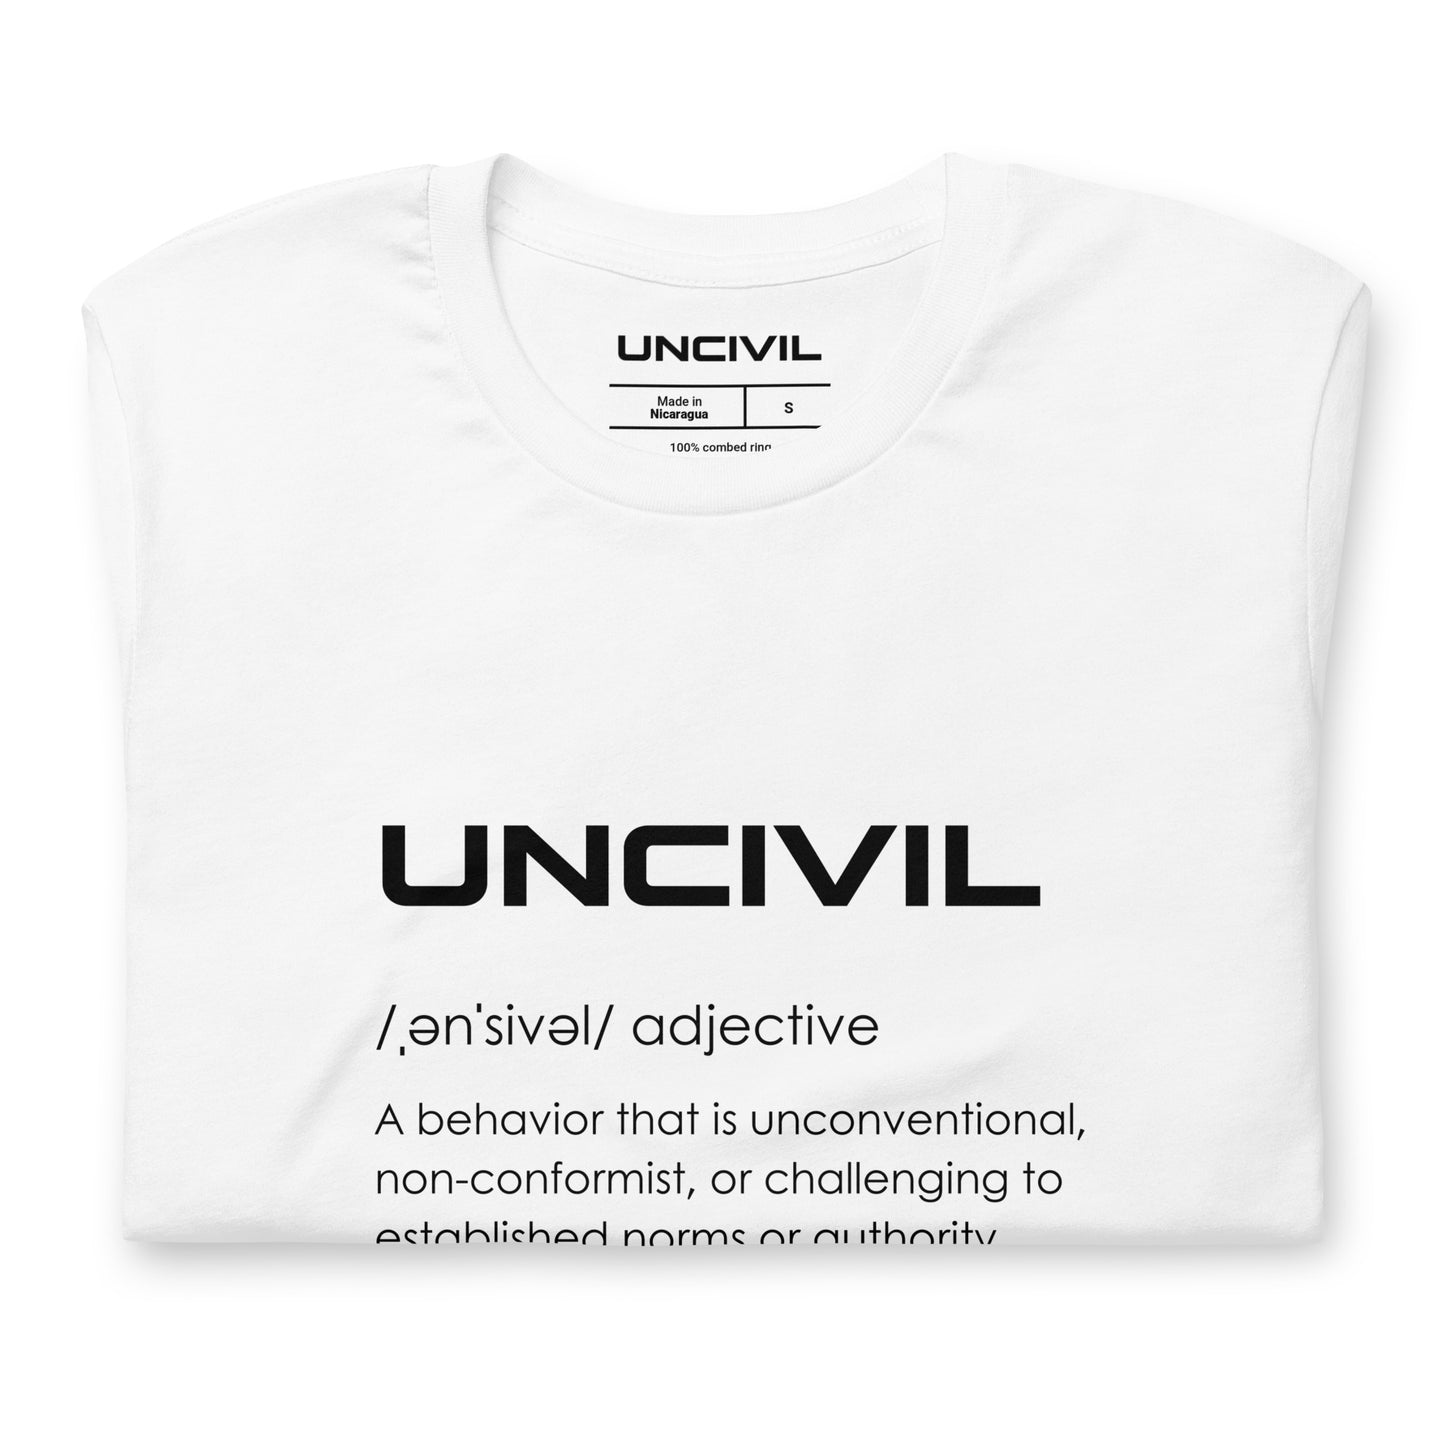 Our UNCIVIL Tee, it's what we stand for. UNCIVIL is a behavior that in unconventional, non-conformist, or challenging to established norms or authority. White shirt.